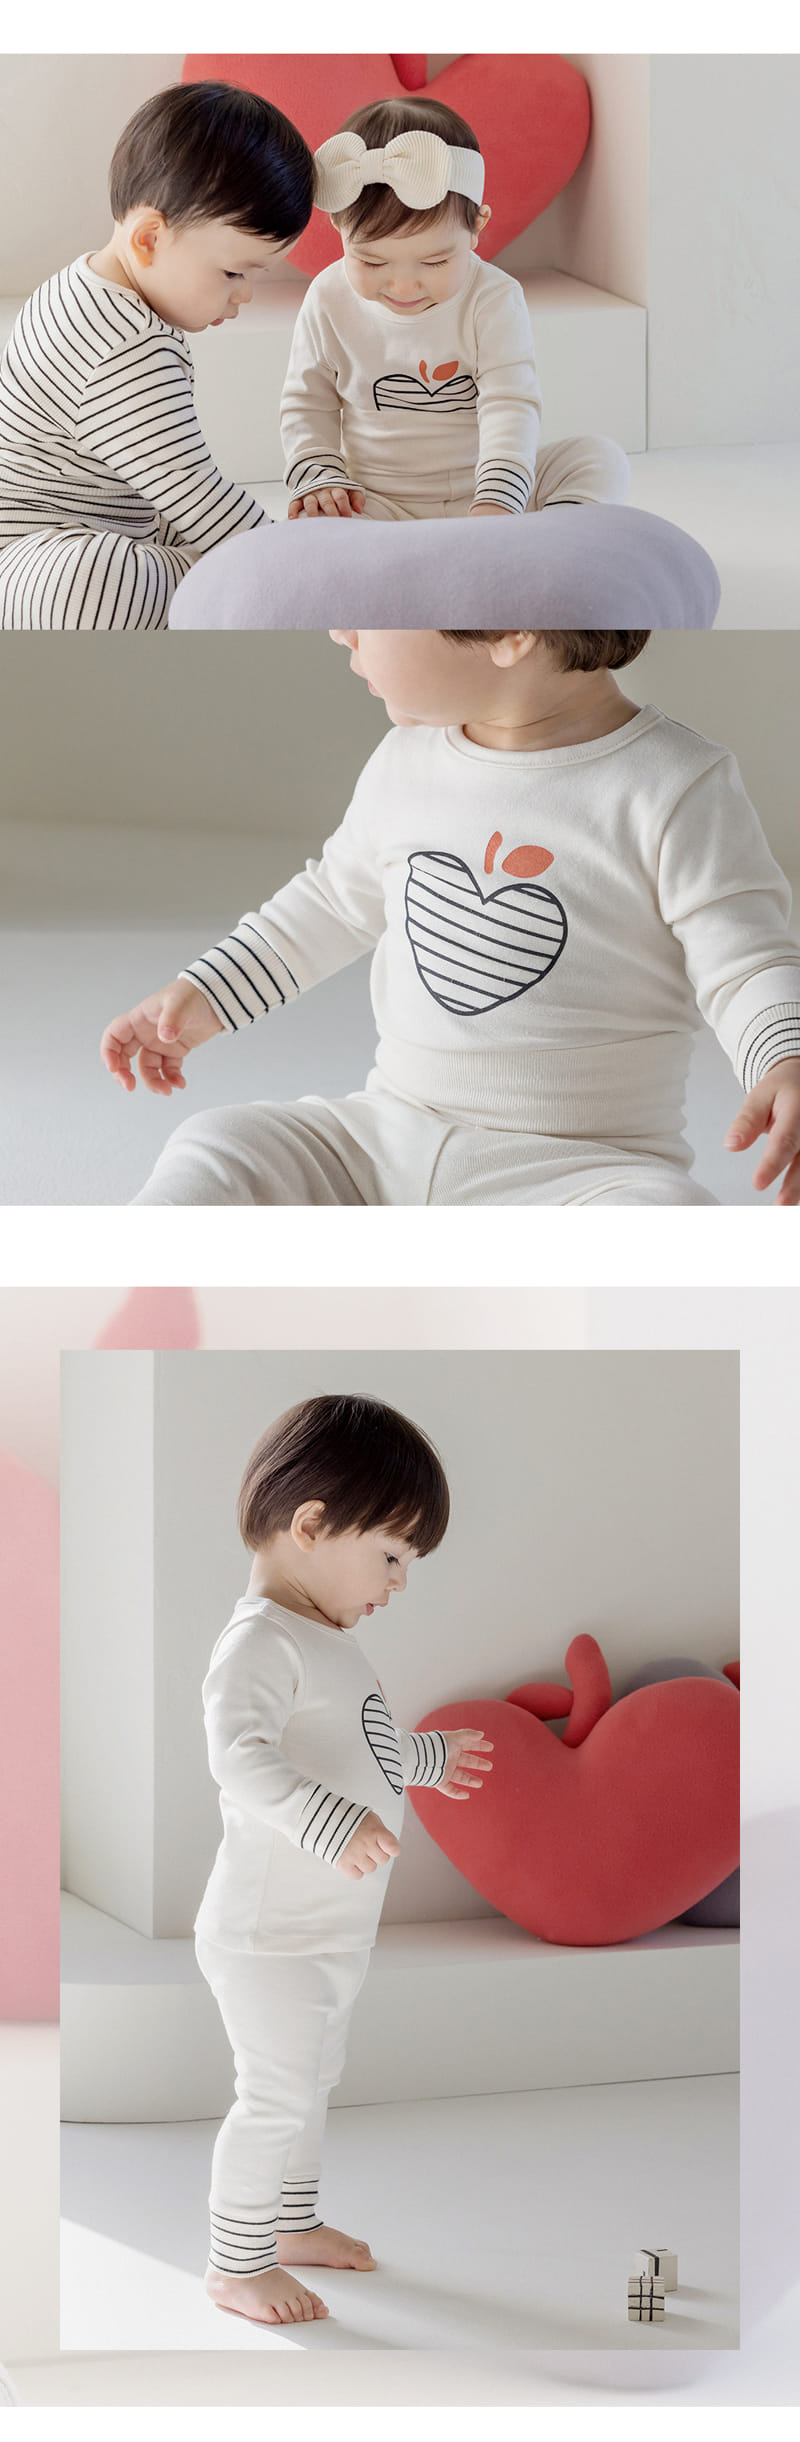 Kids Clara - Korean Baby Fashion - #onlinebabyboutique - Molang Compy Belly Baby Easy Wear - 2